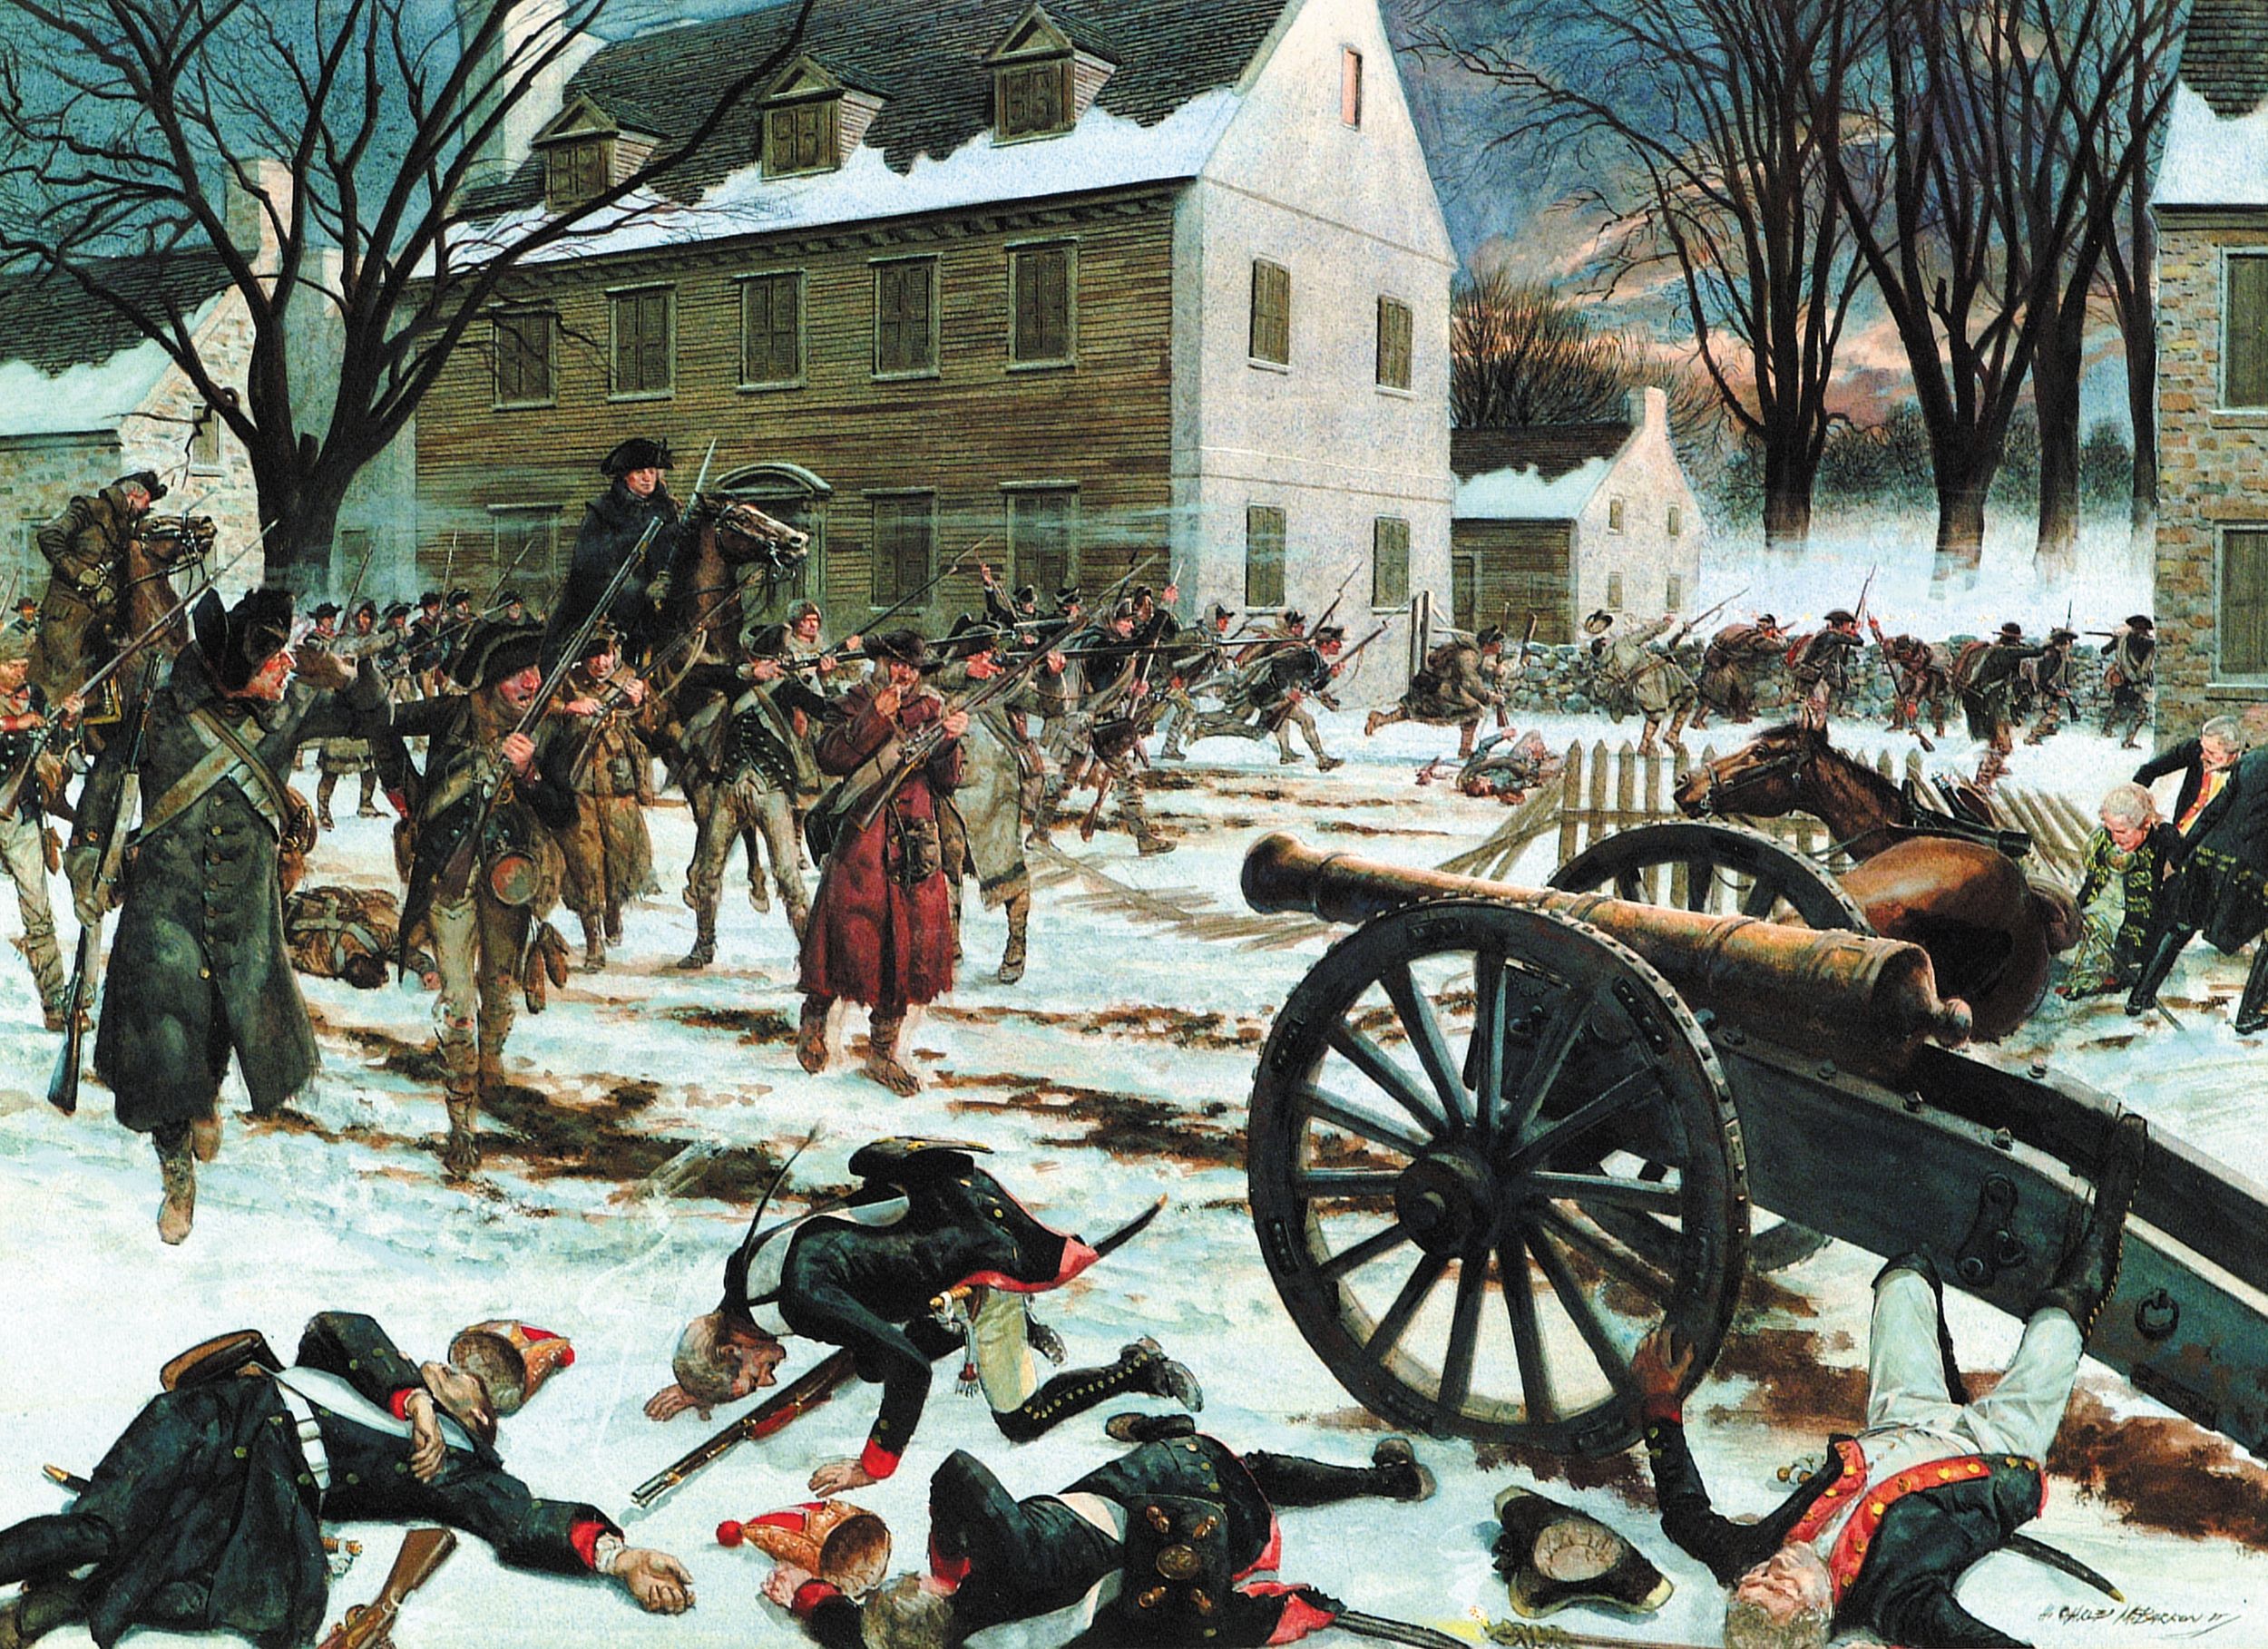 Continental forces overrun the Hessian position at Trenton in a surprise Christmas-night raid in 1776.